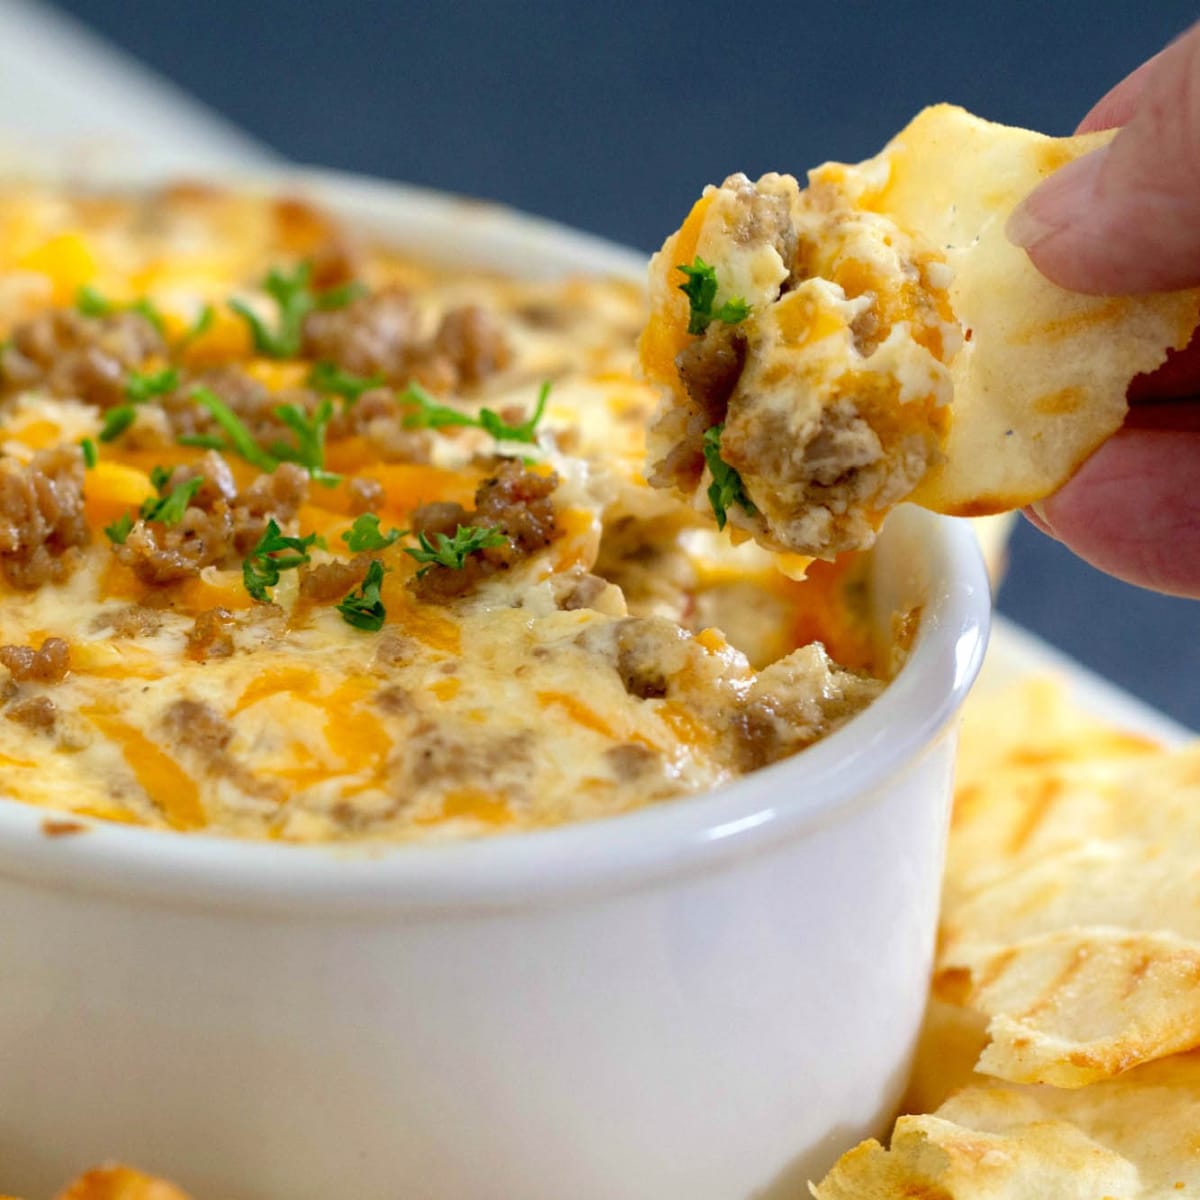 Hand dipping a chip into cheese dip